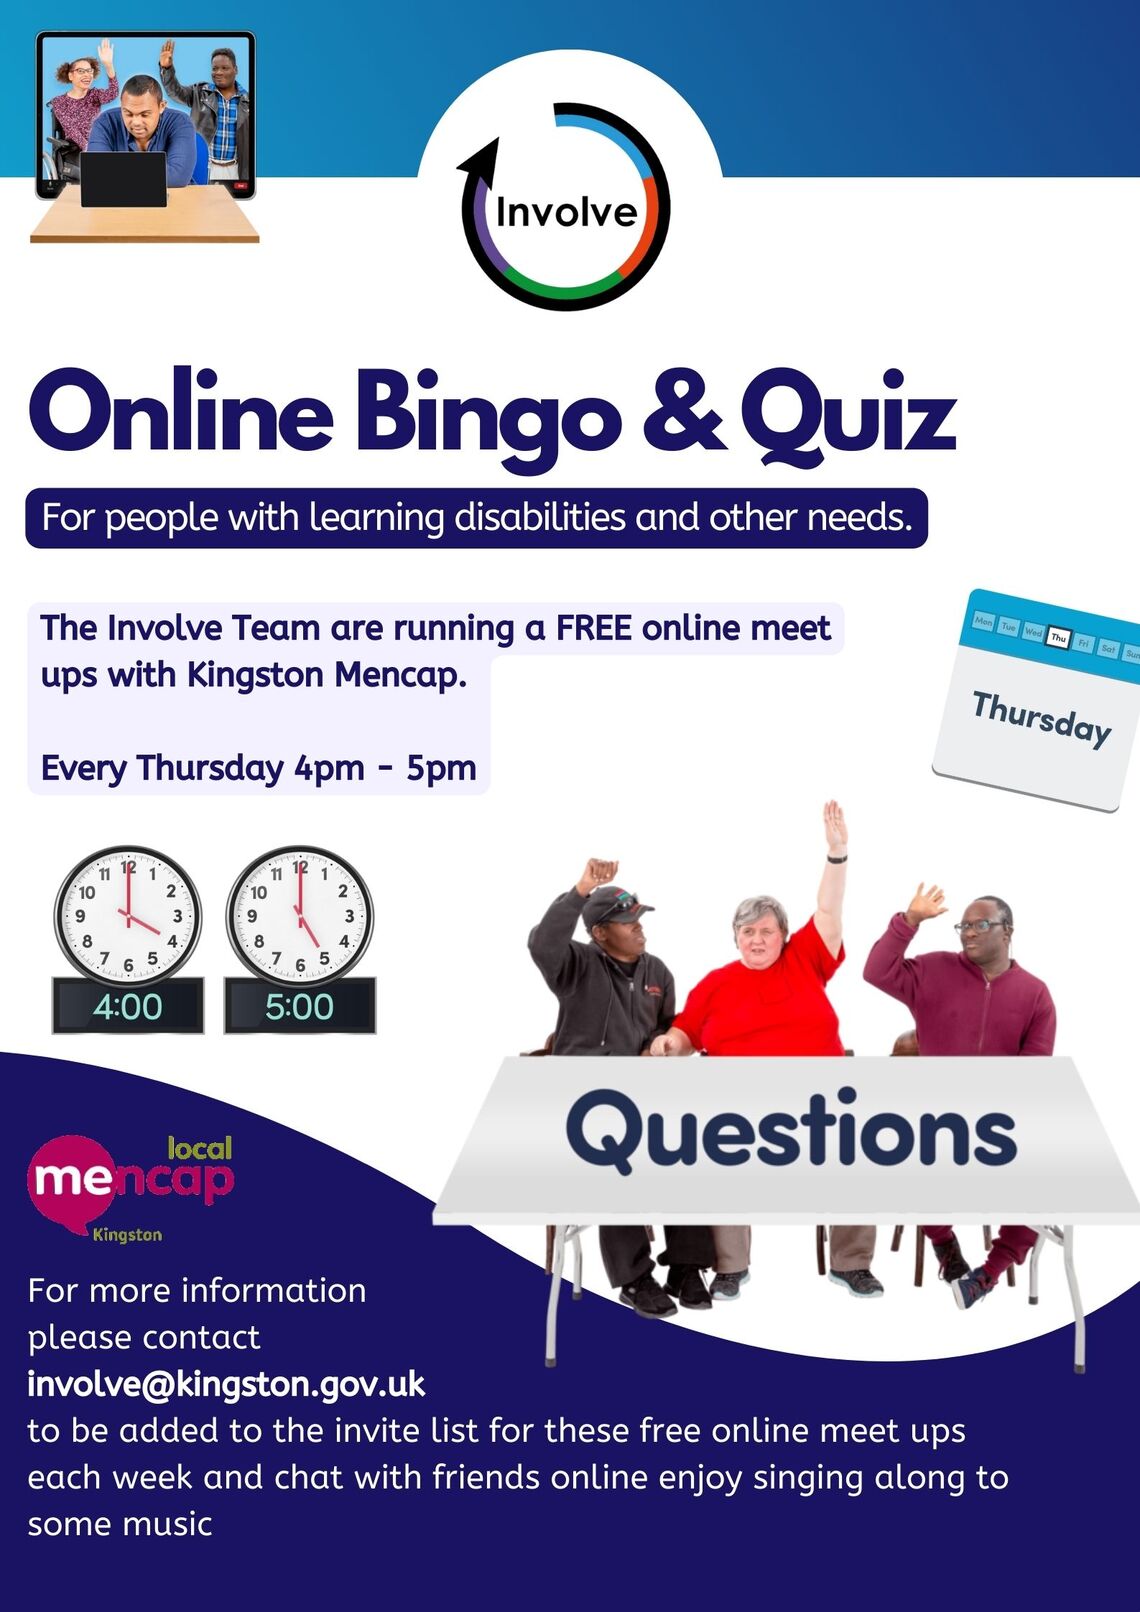 flyer sowing details for online bingo and quiz